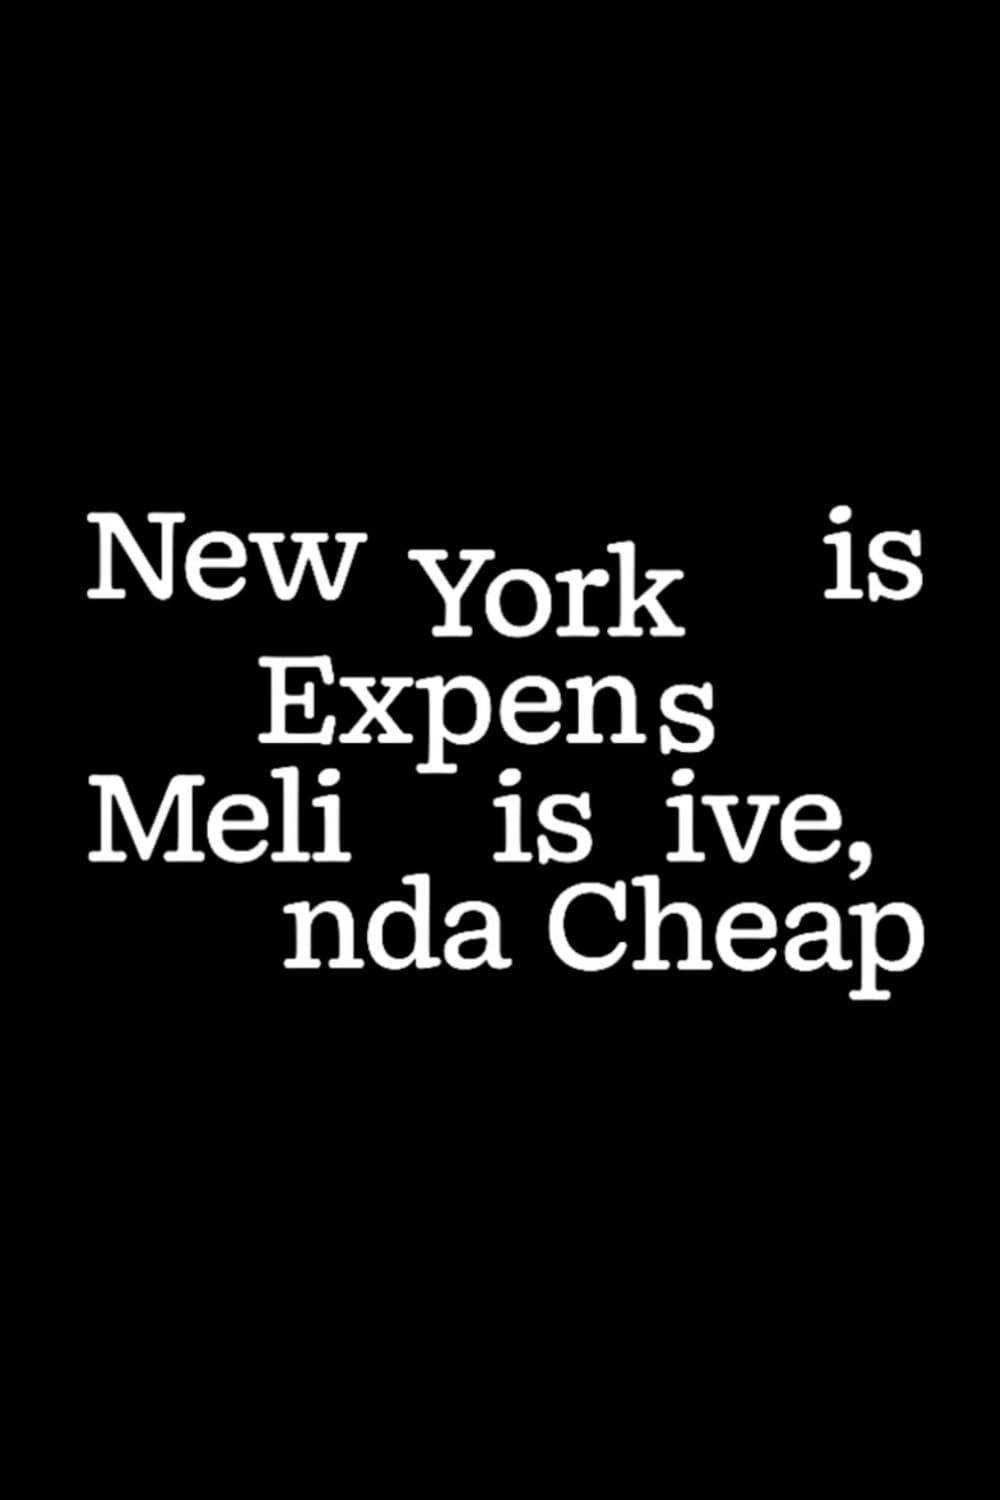 New York is Expensive, Melinda is Cheap poster